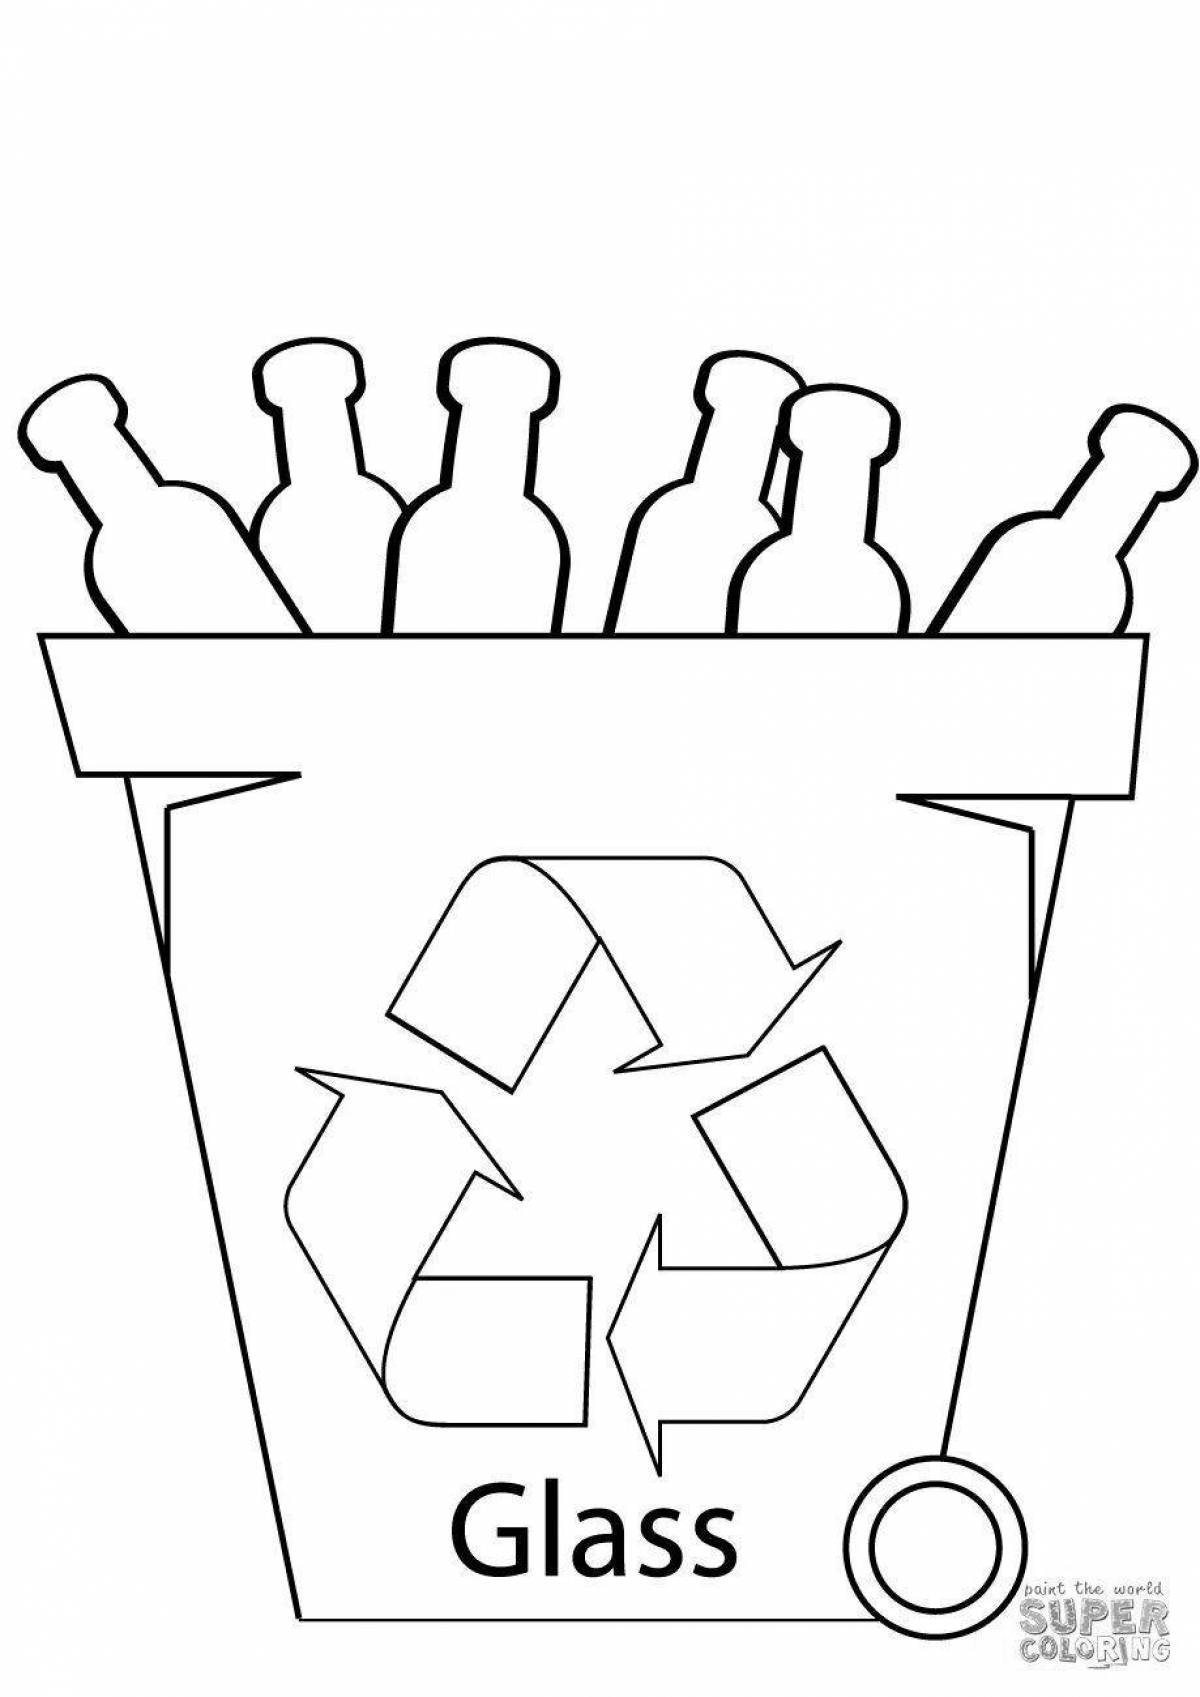 Fun coloring book on sorting garbage for the little ones